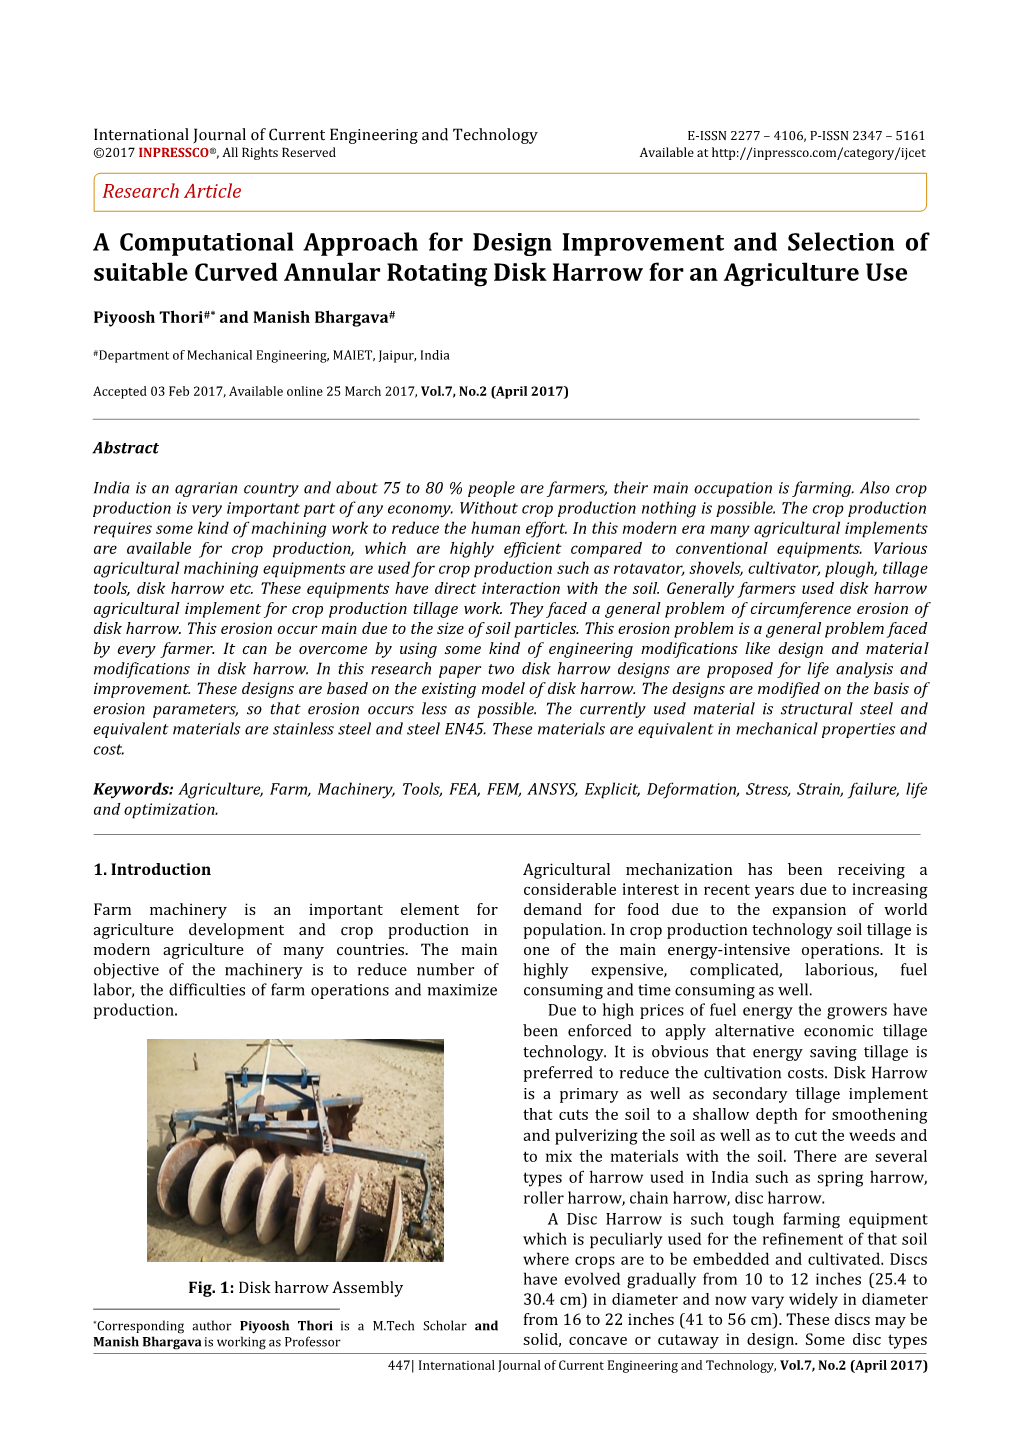 A Computational Approach for Design Improvement and Selection of Suitable Curved Annular Rotating Disk Harrow for an Agriculture Use